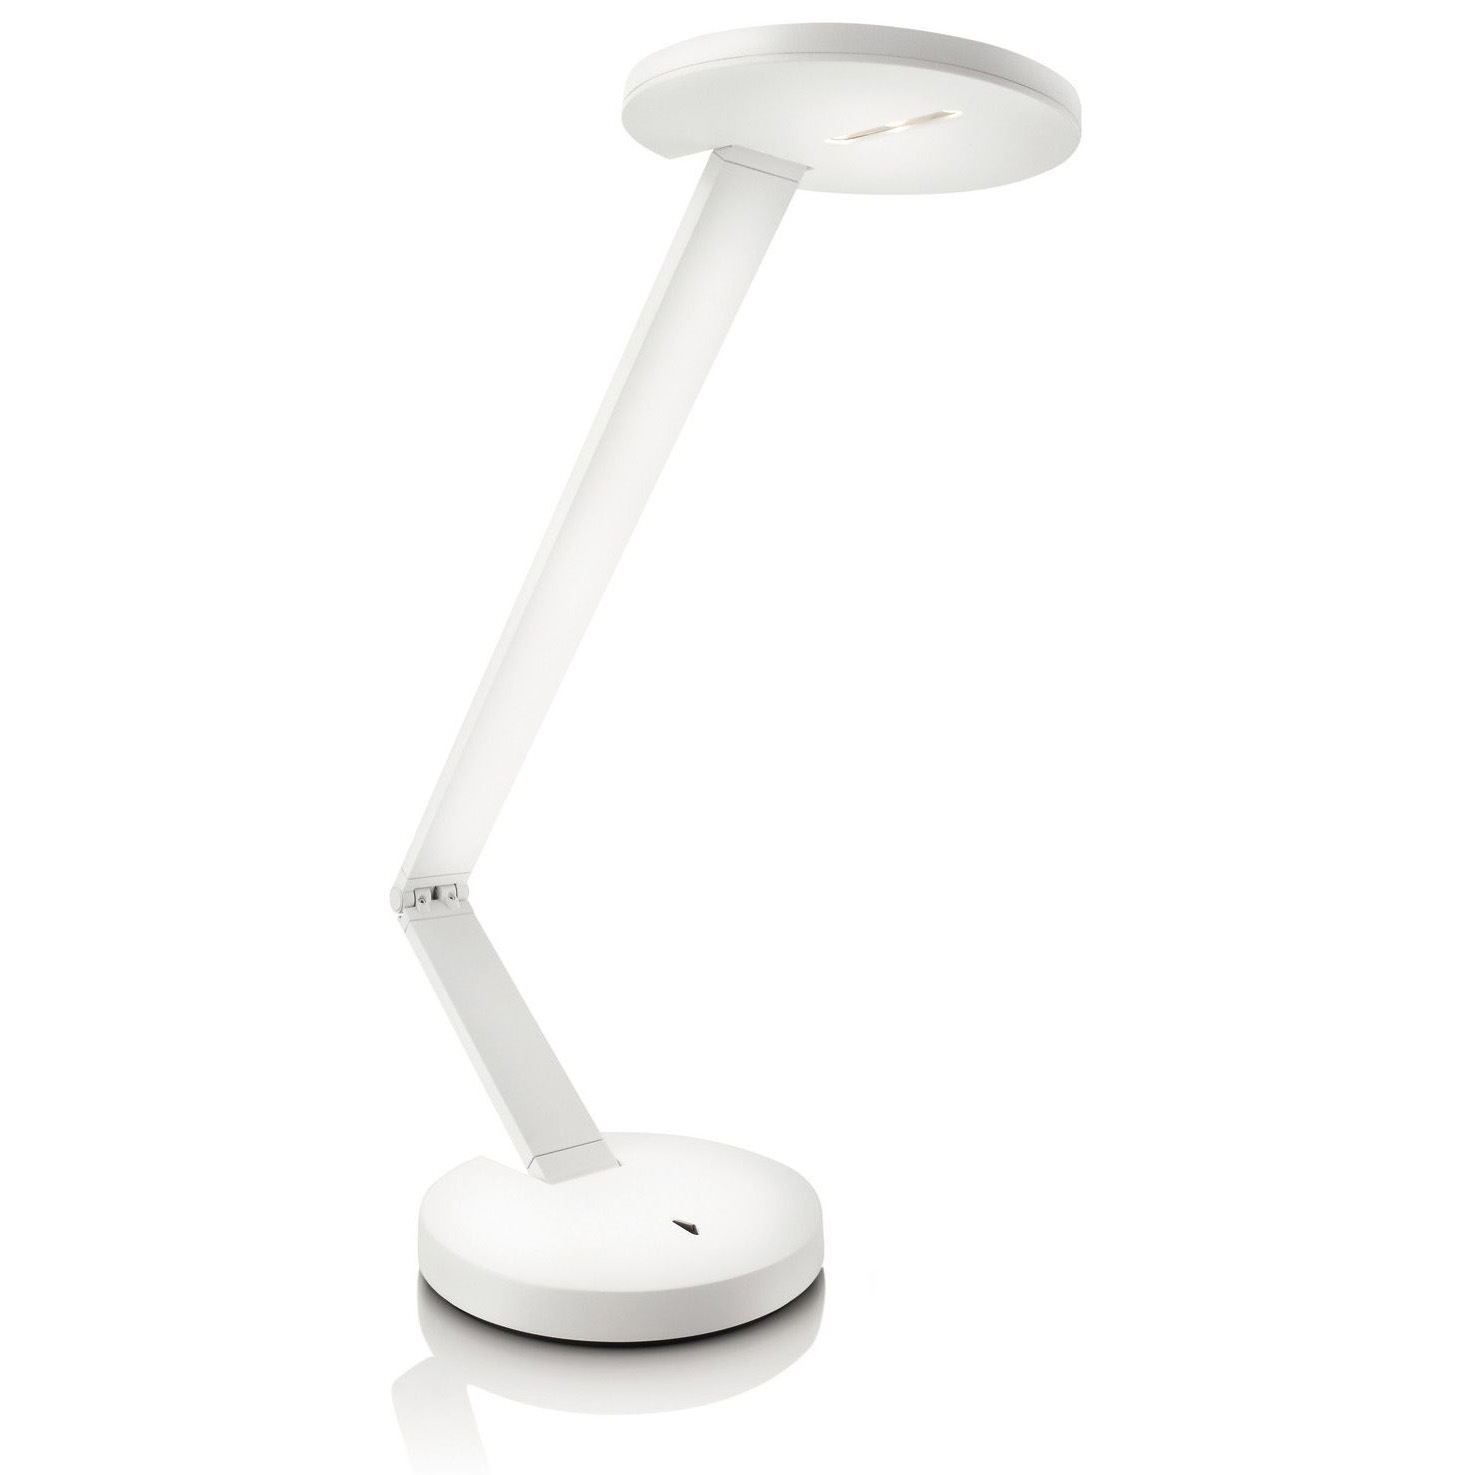 Desk LED lamp PHILIPS Instyle Roswell 2700K 6.5W 270lm